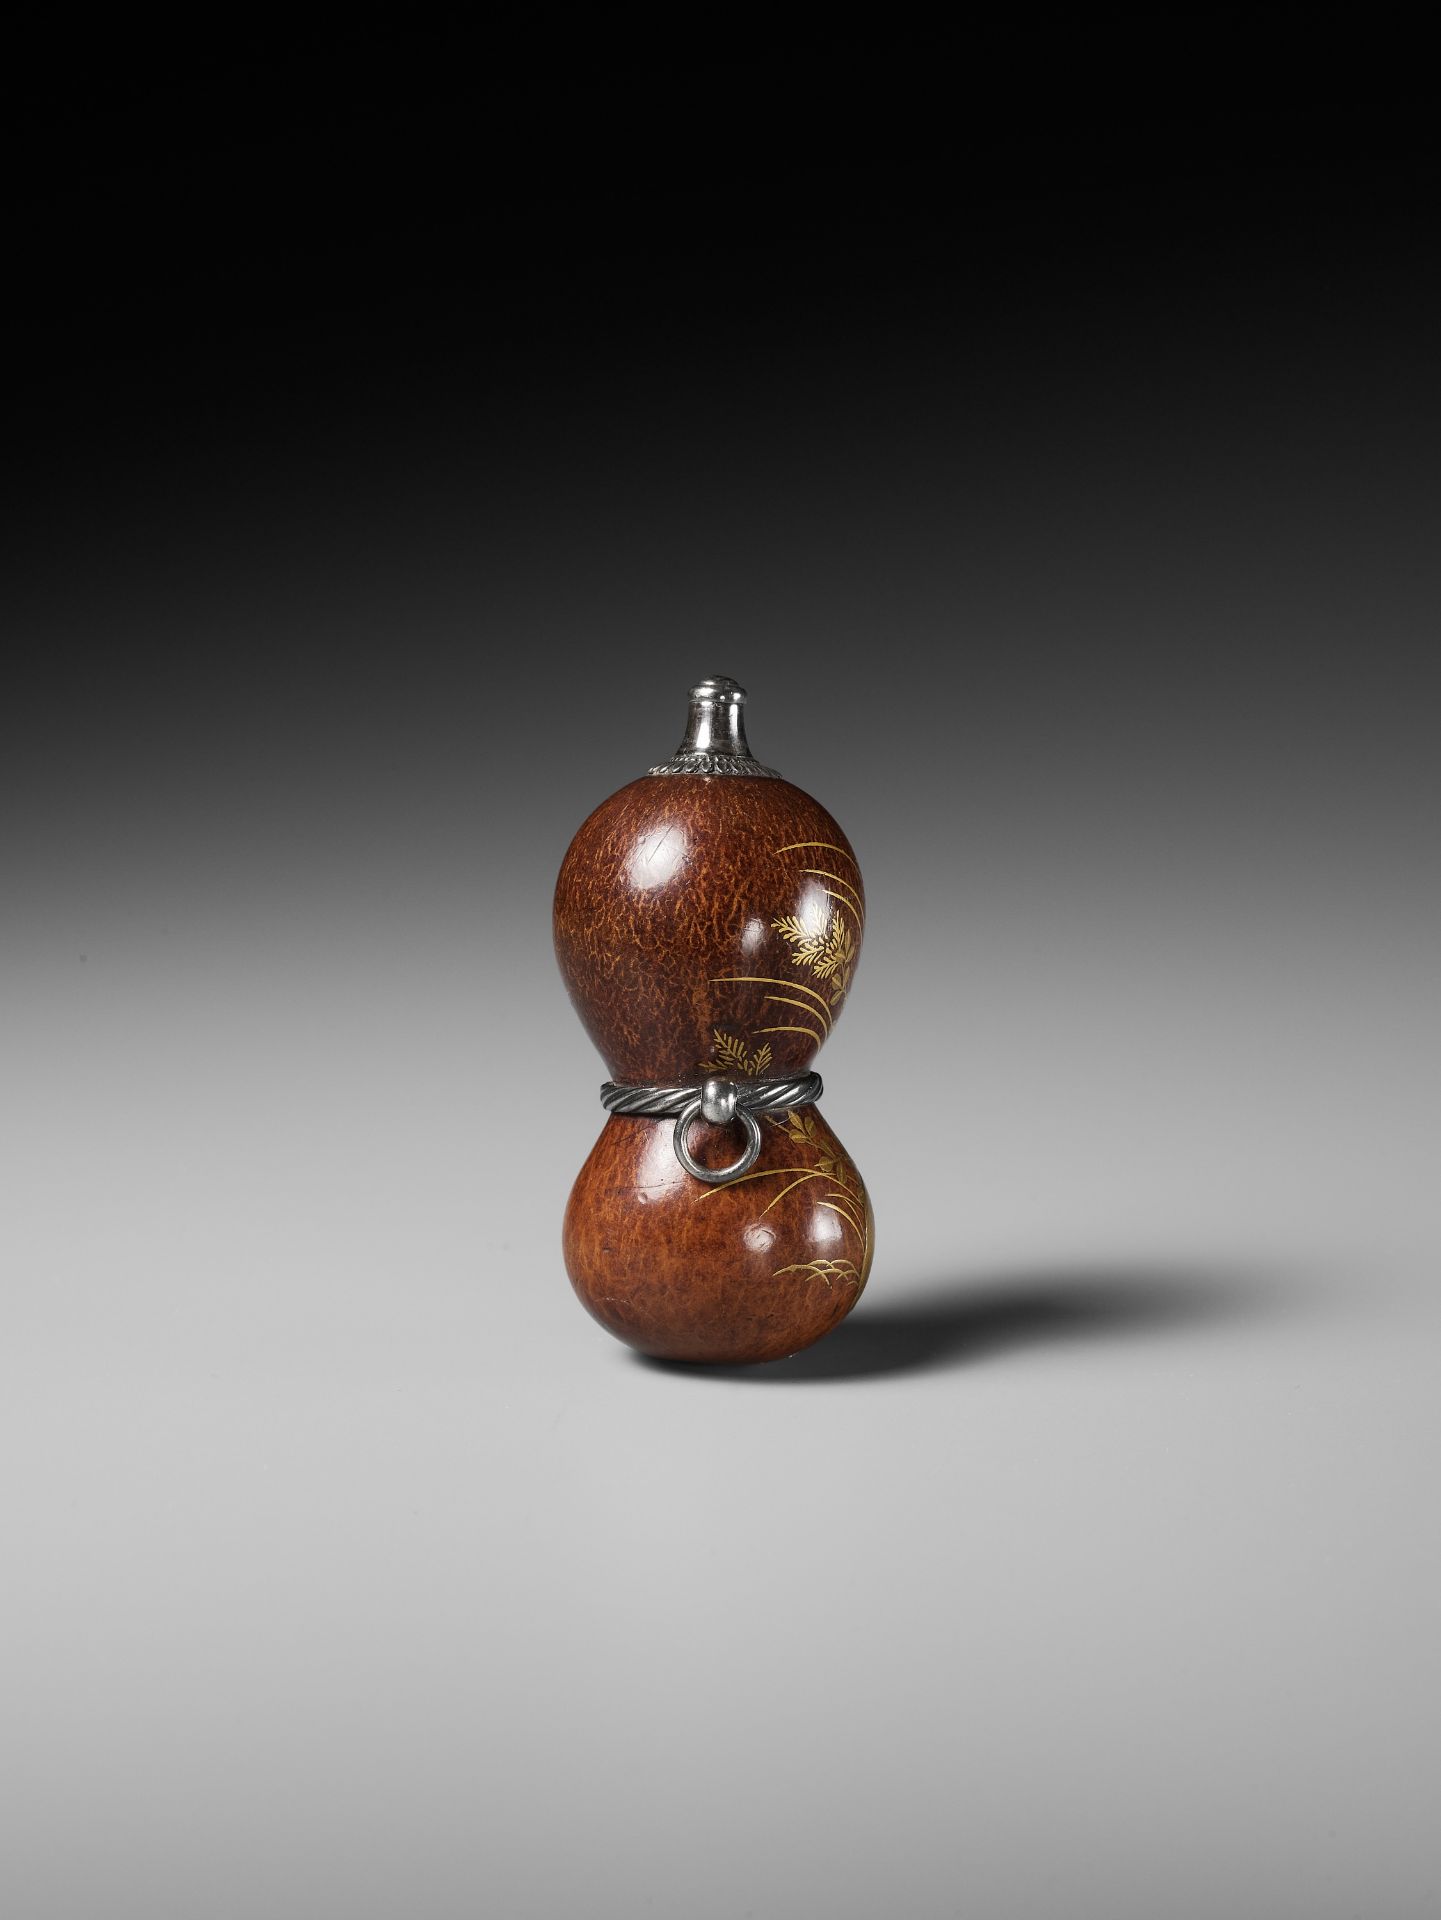 A FINE AND LARGE LACQUERED GOURD NETSUKE WITH A CHUBBY HARE AMONGST AUTUMN GRASSES - Image 7 of 11